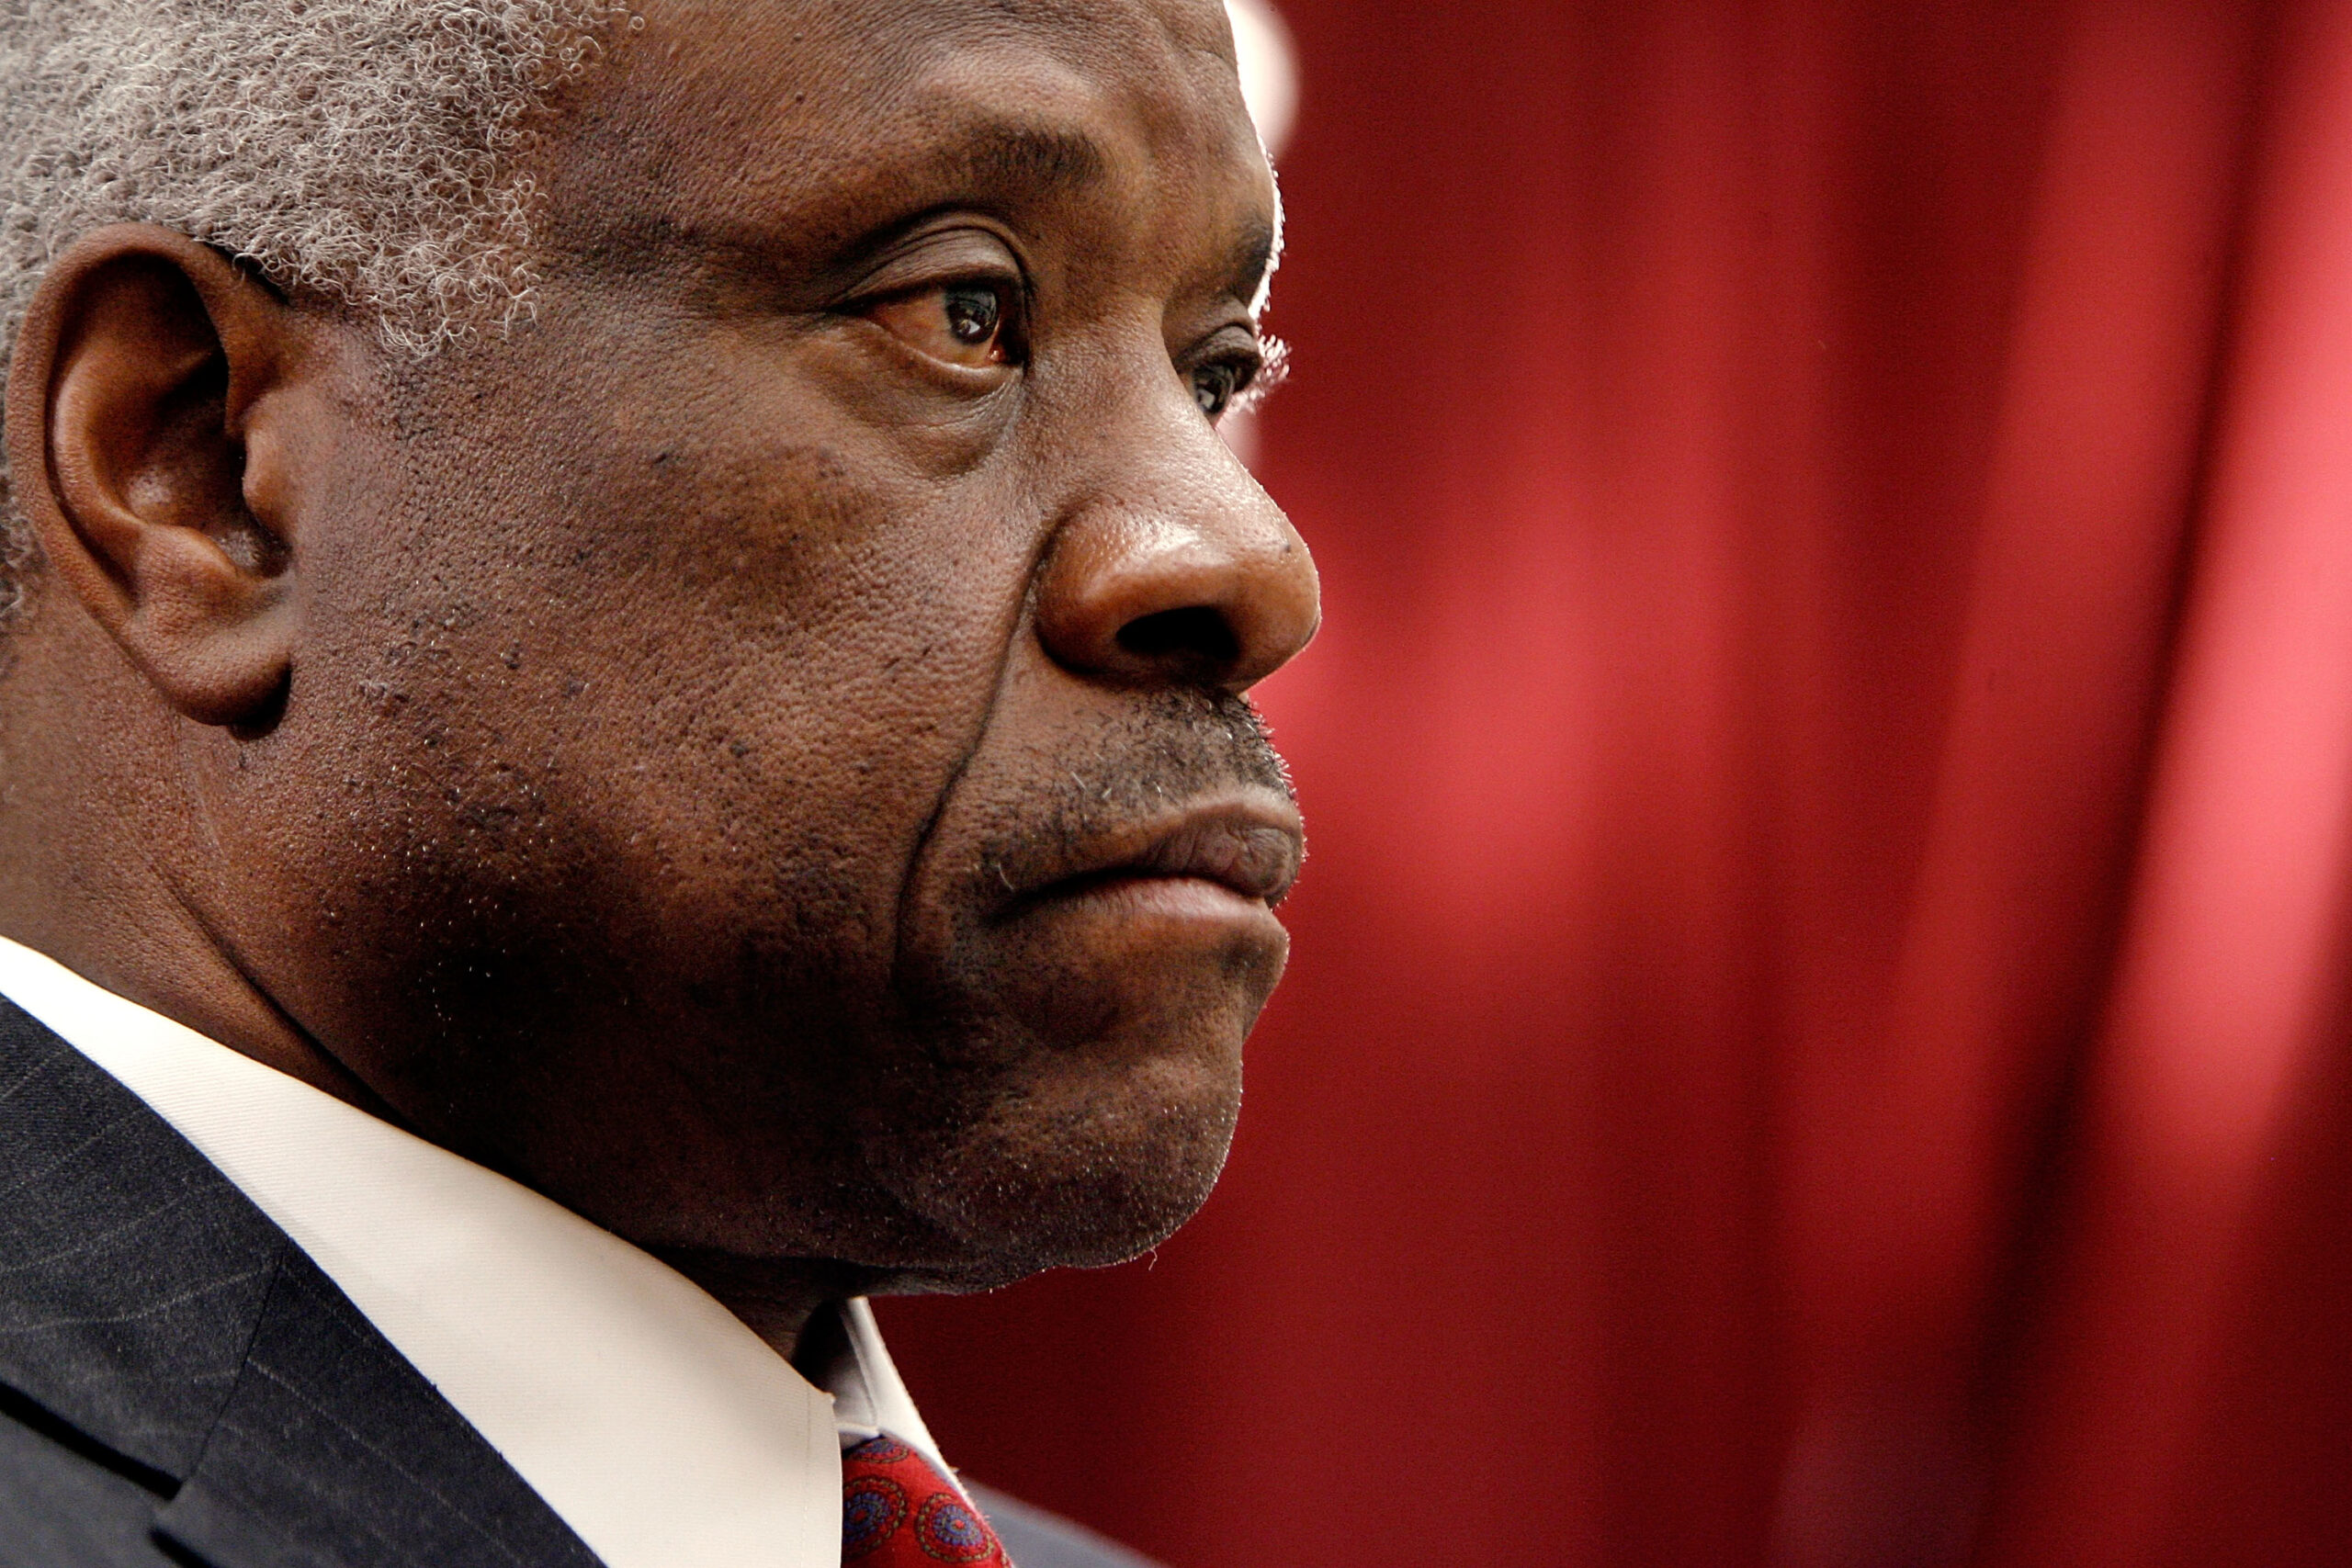 Friend defends Clarence Thomas against left-wing smear.